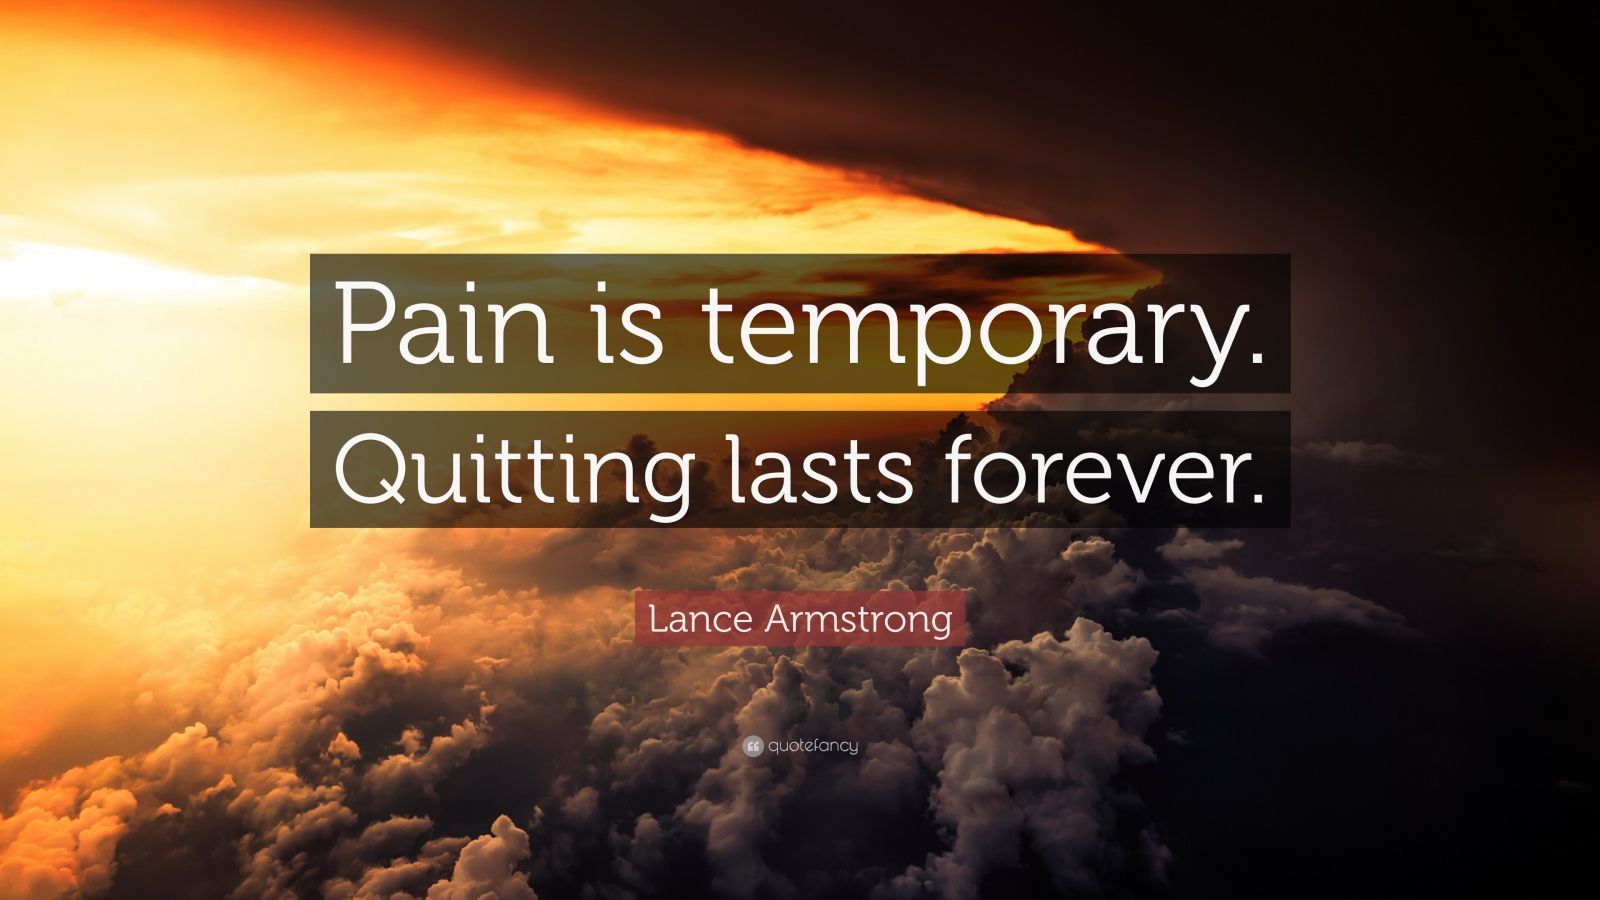 Lance Armstrong Quote “Pain is temporary. Quitting lasts